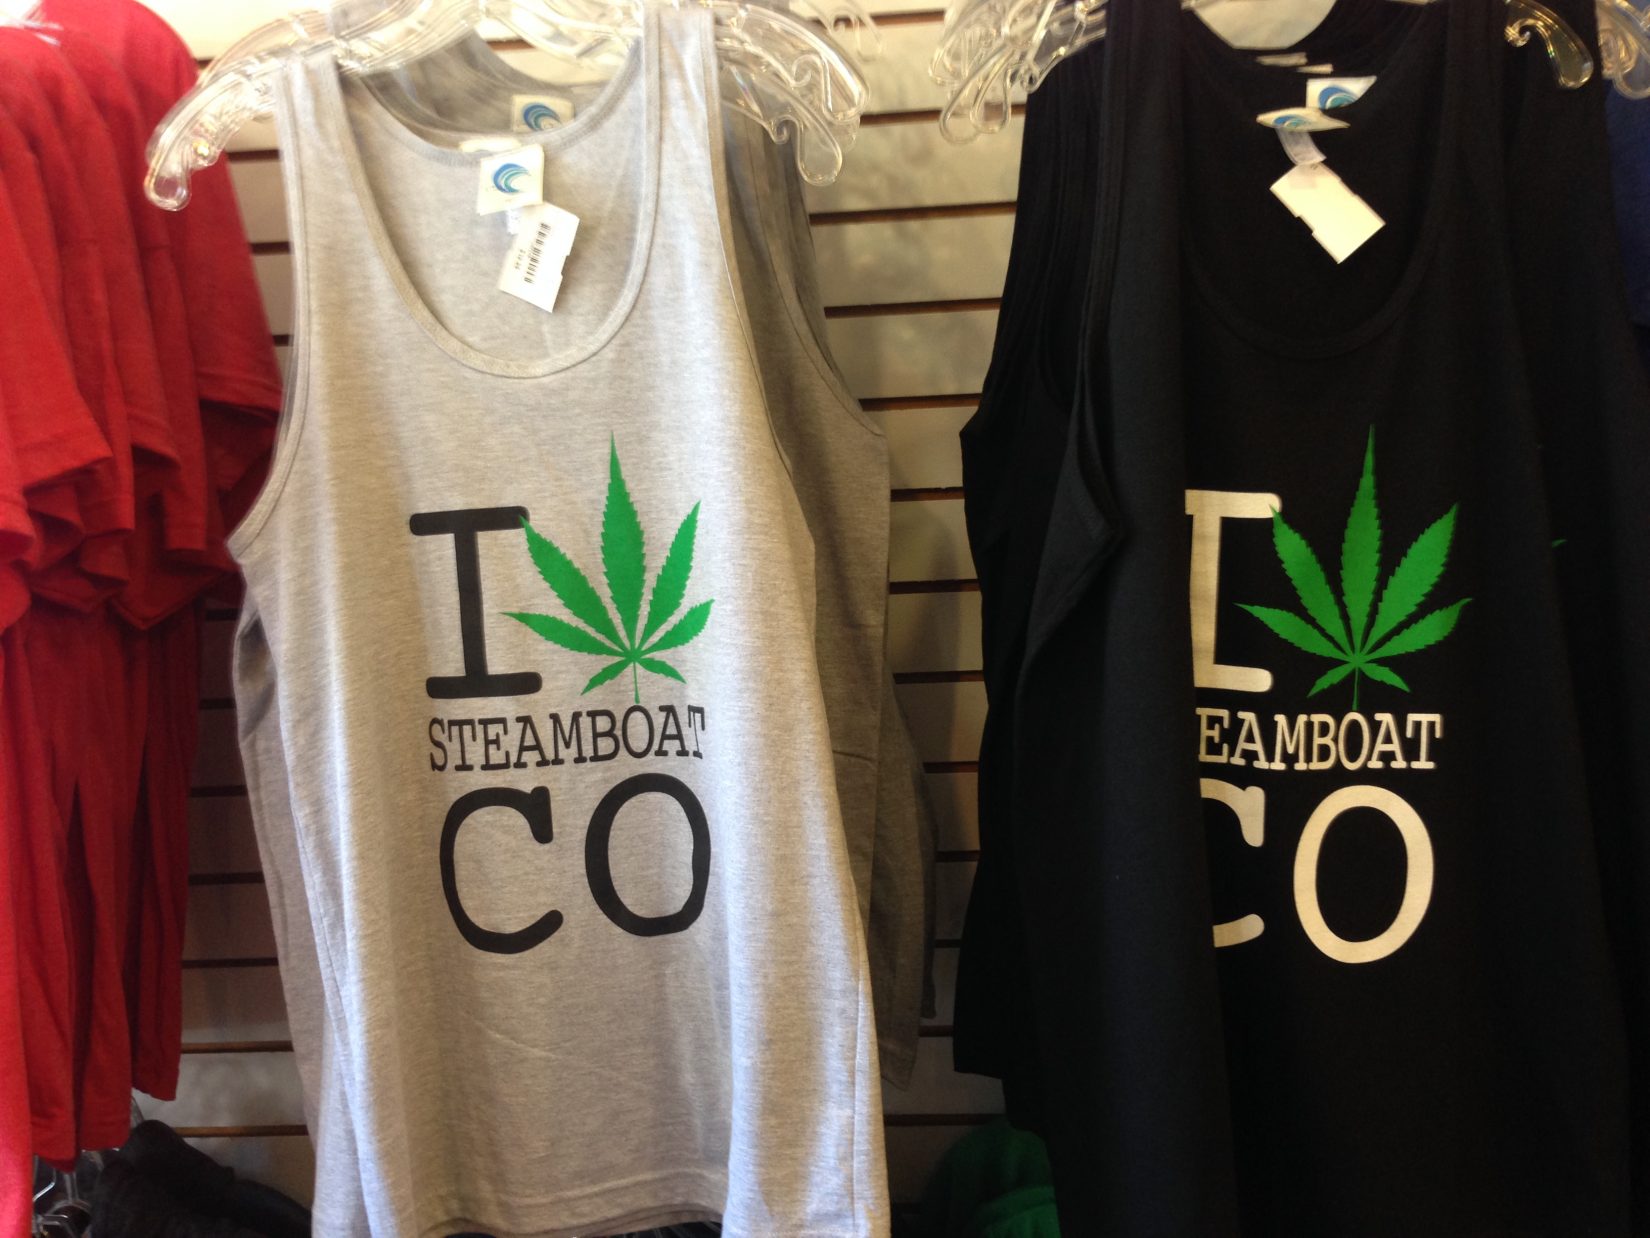 Marijuana tourism is real. Need proof? Just take a look at the souvenir shops in resort town Steamboat Springs, Colo. (Ricardo Baca, The Cannabist)